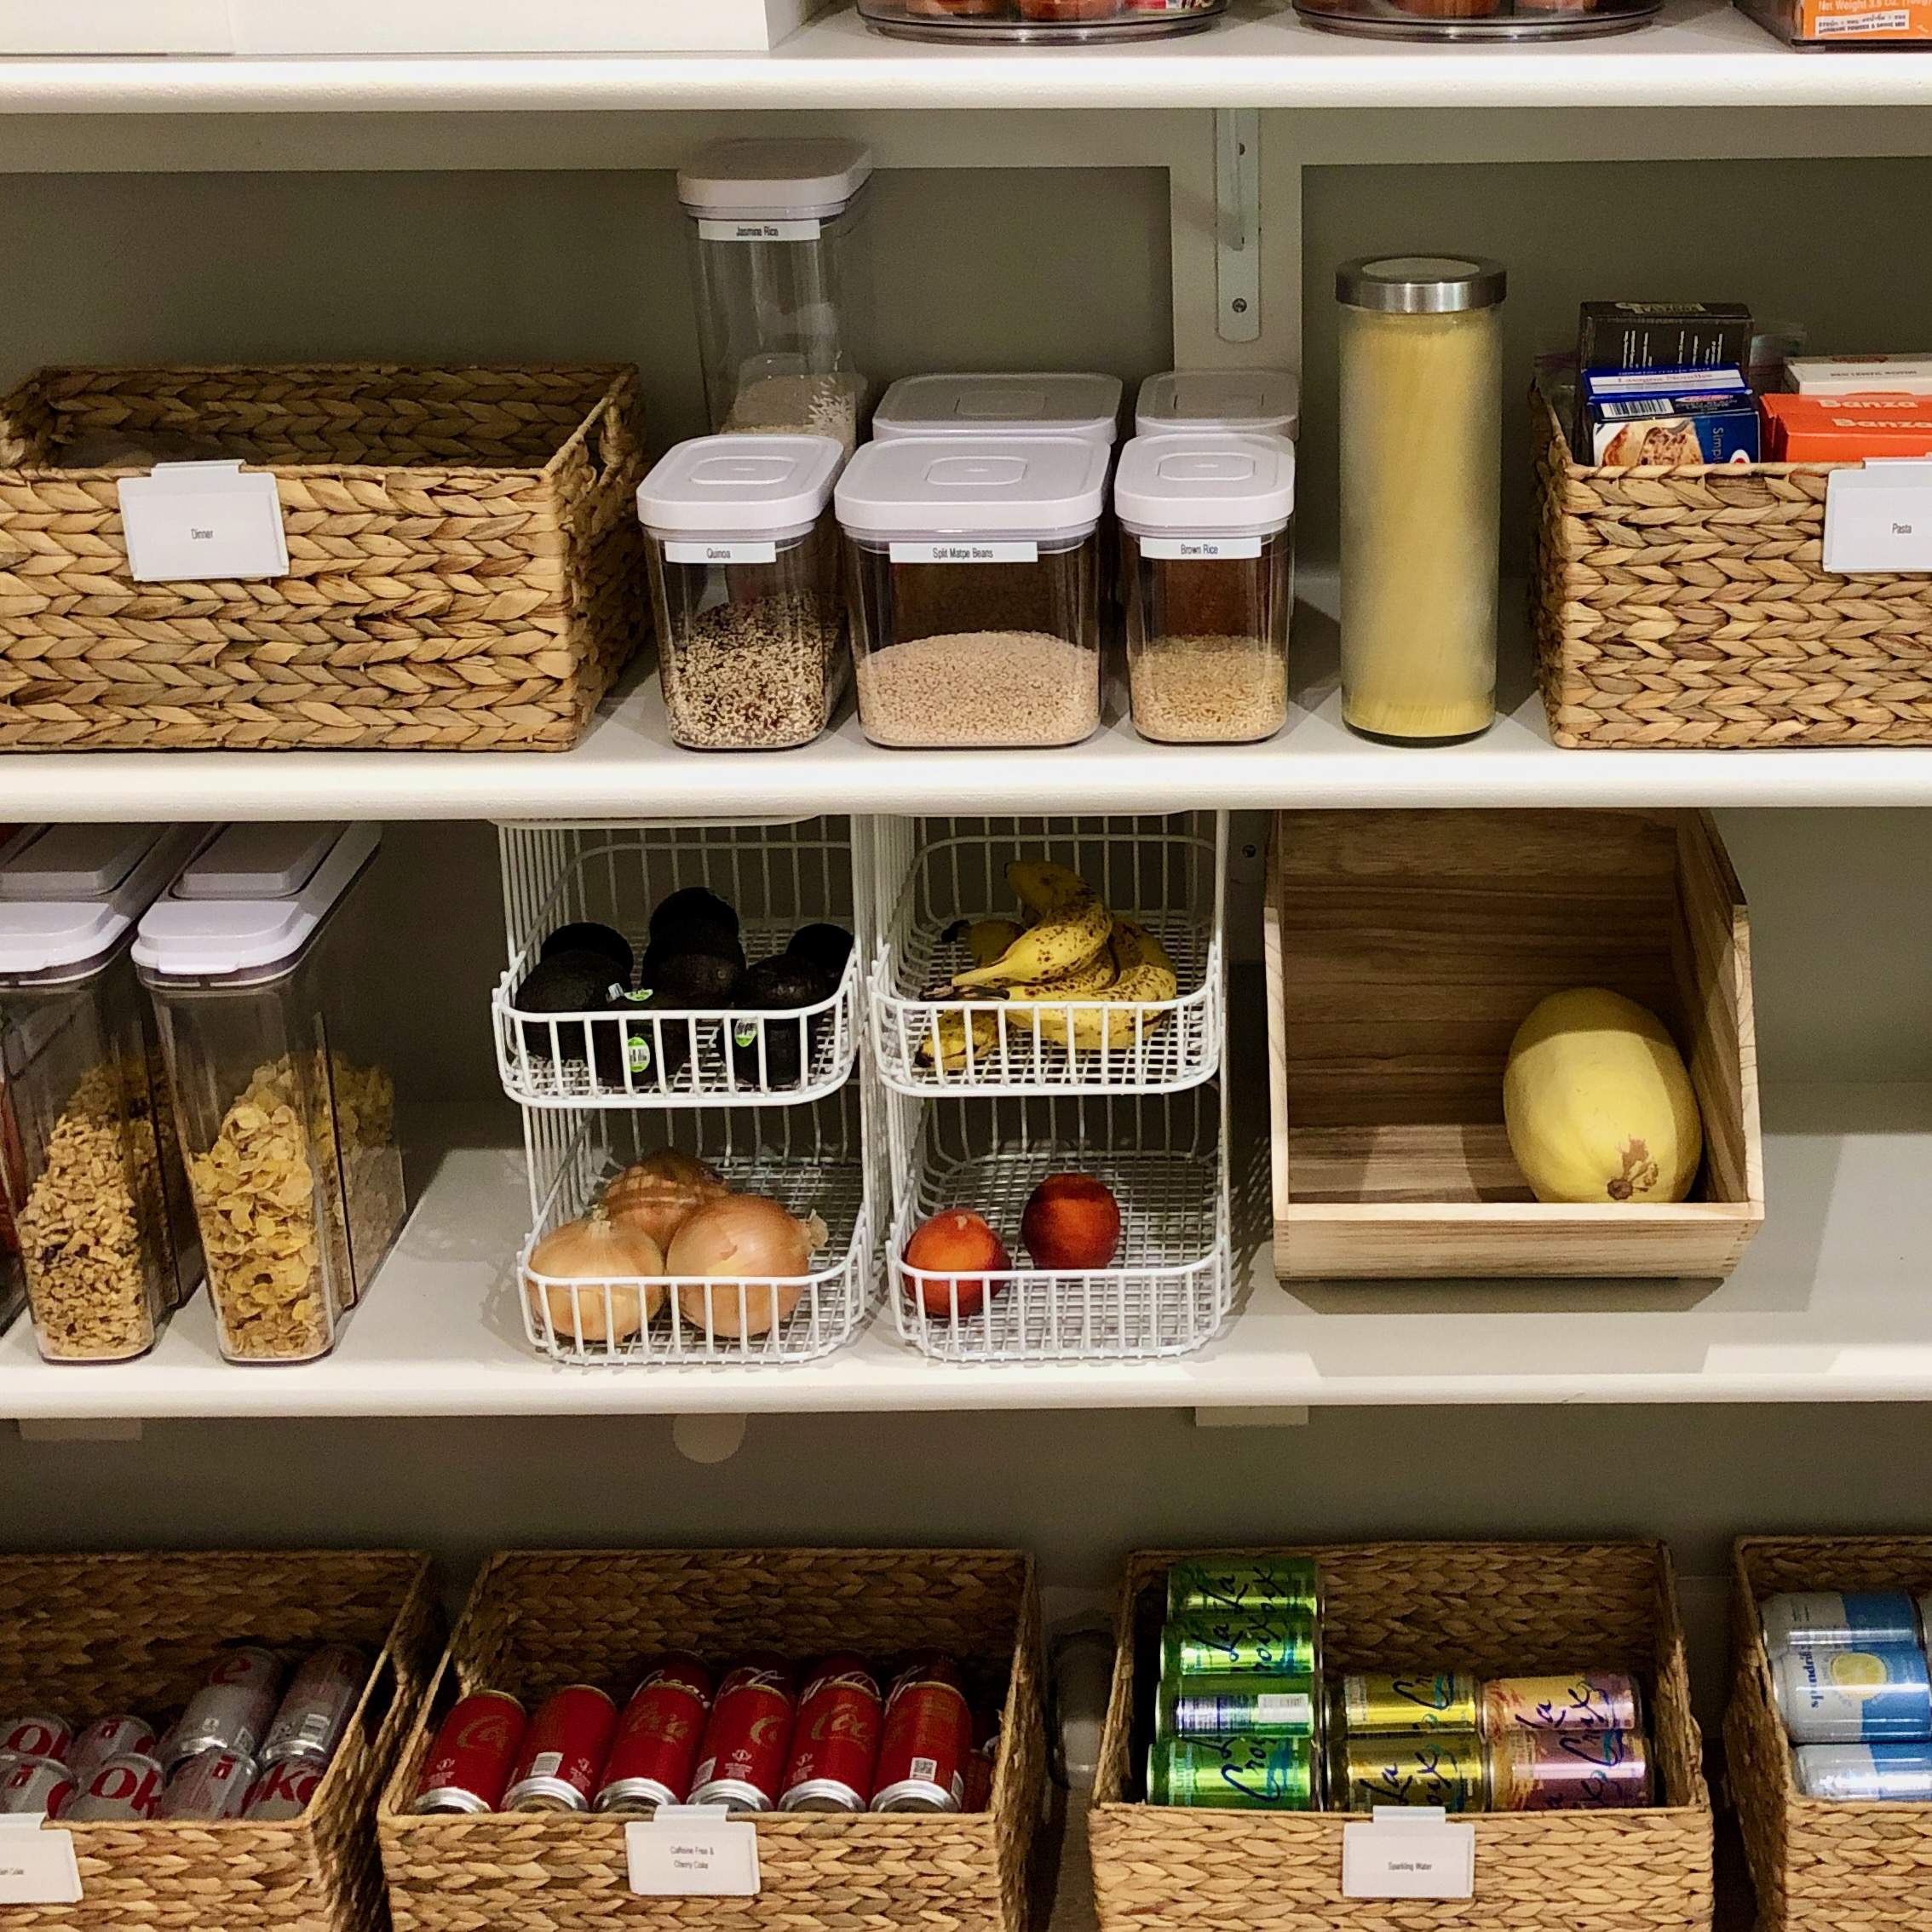 Kitchen pantry with grocery items organized on shelves. Baskets and bins hold various categories